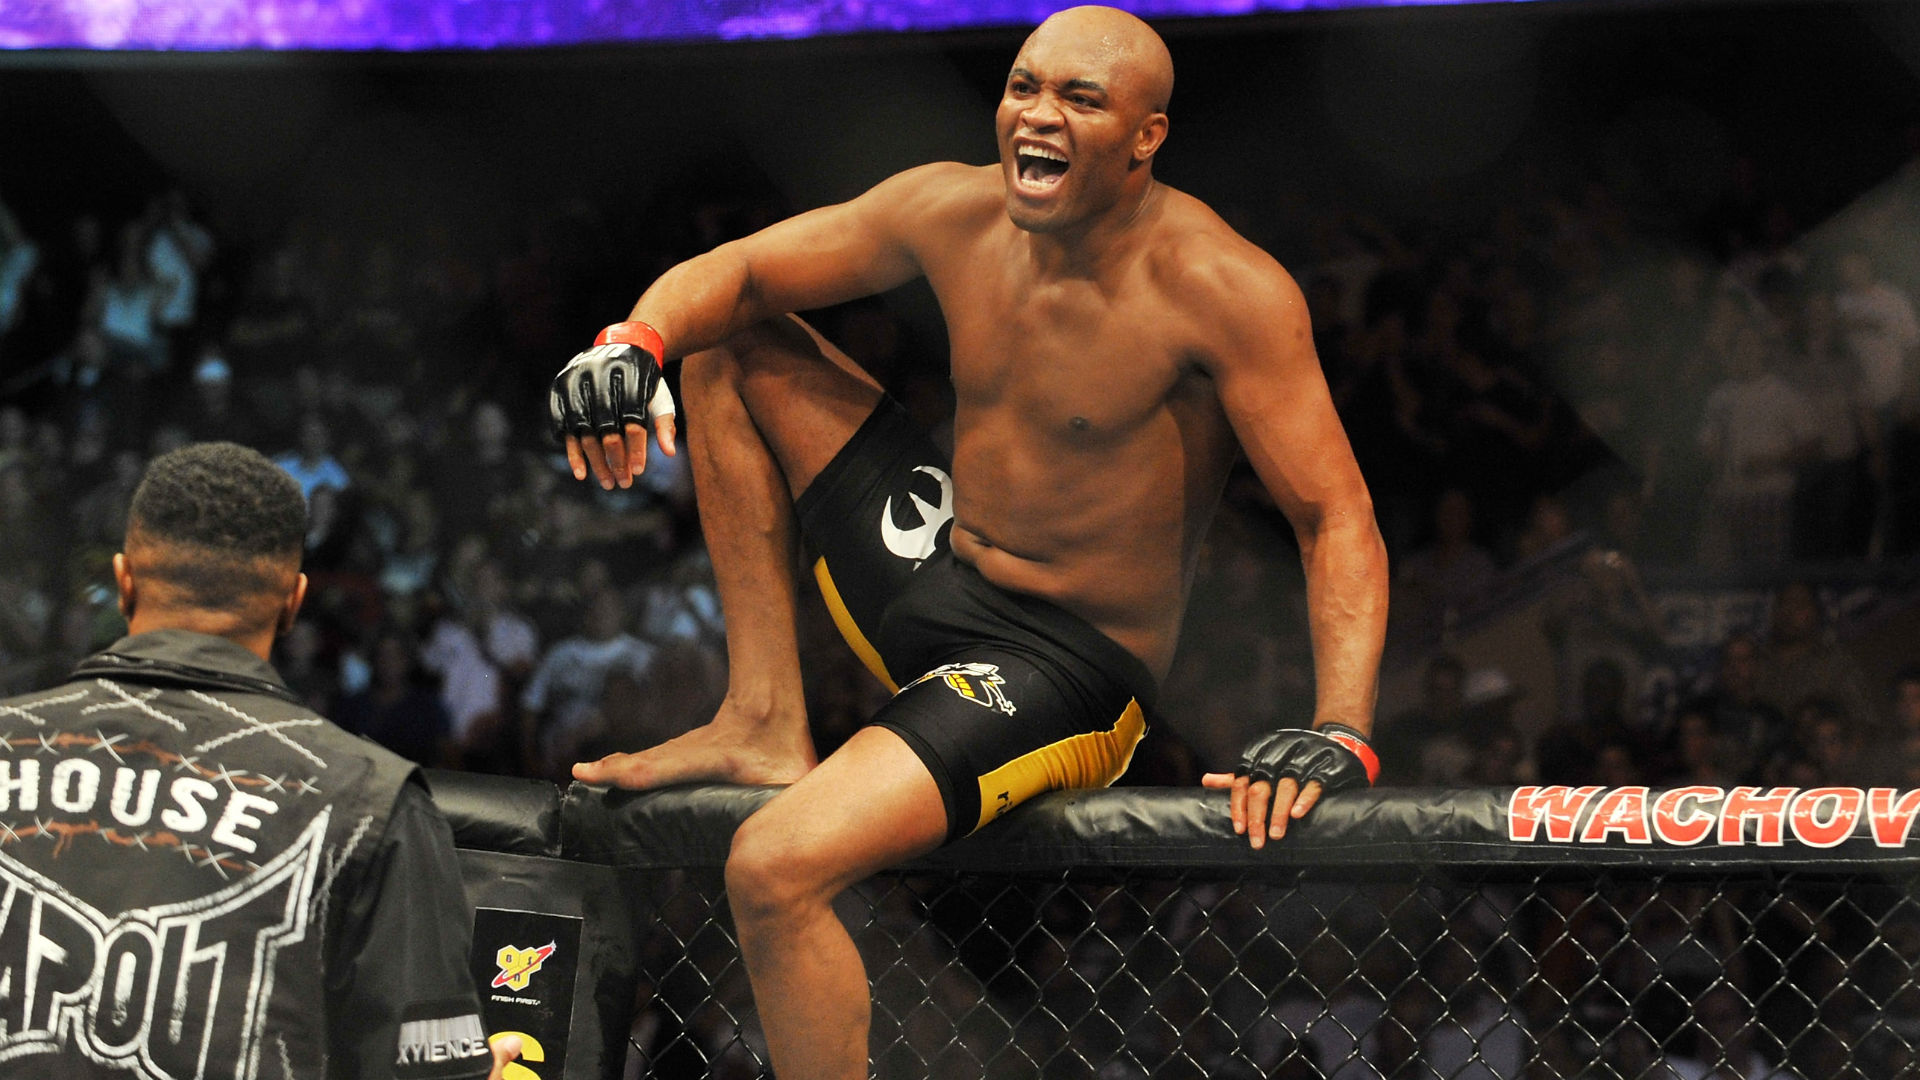 Anderson Silva is one of the most popular MMA fighters of all time